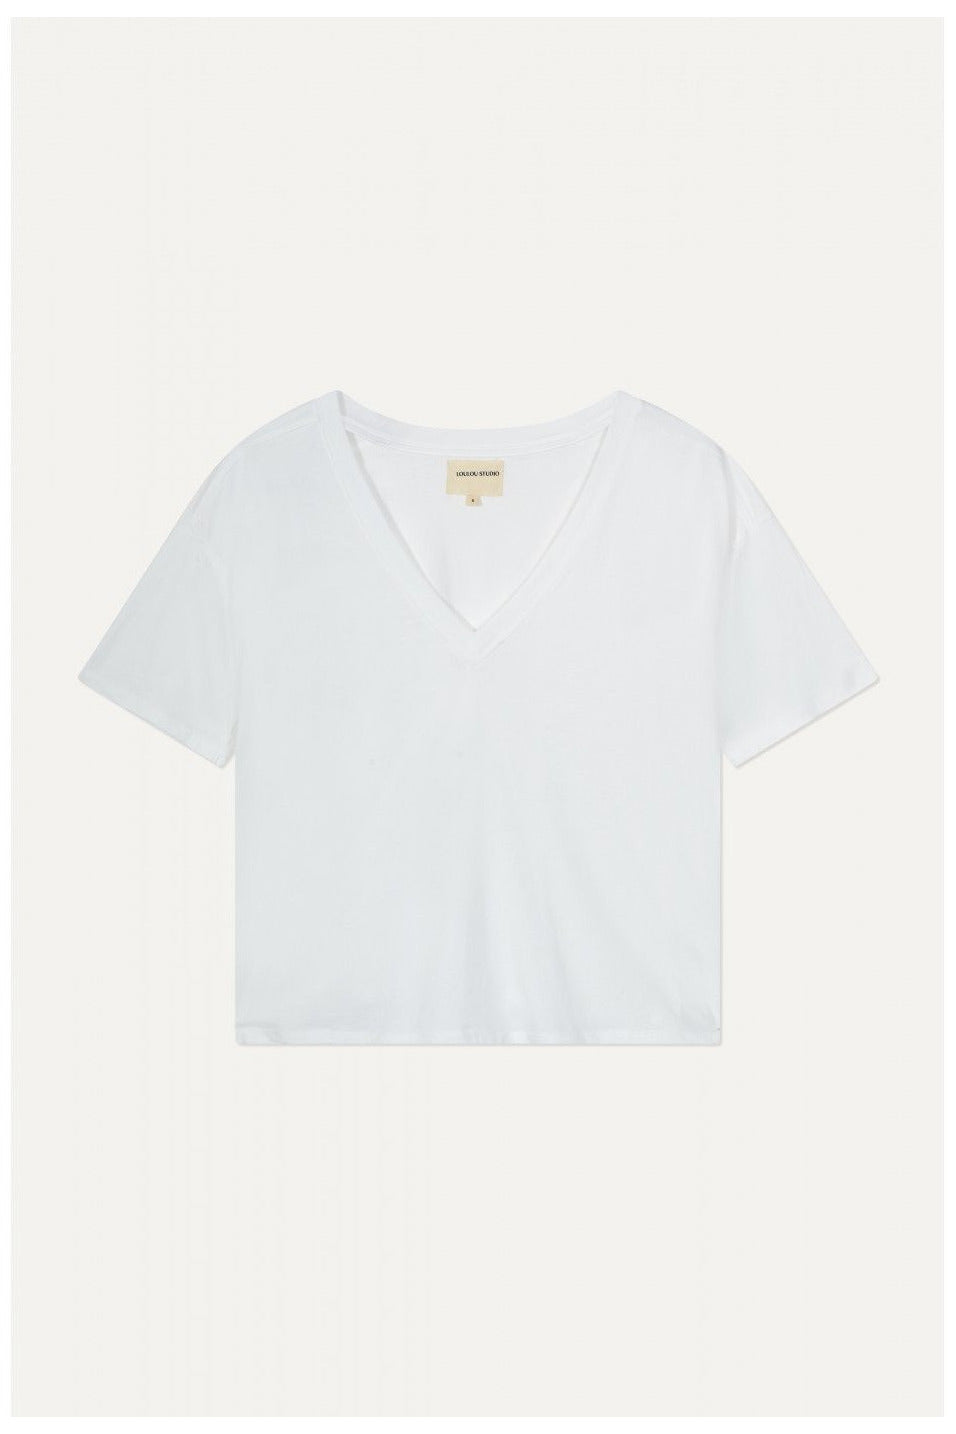 FAAA V NECK T-SHIRT WHITE BY LOULOU STUDIO - BEYOND STUDIOS